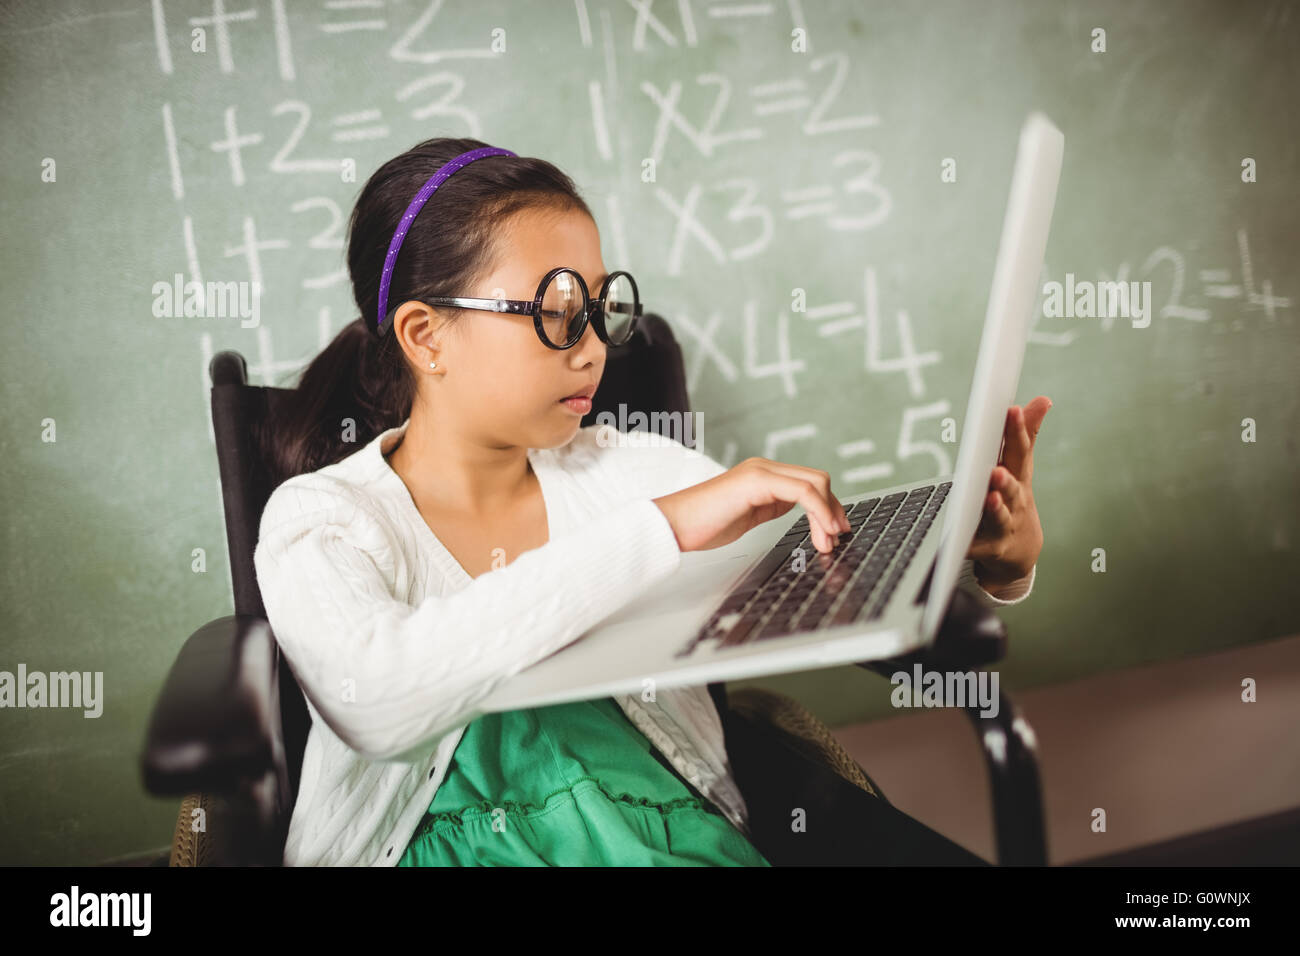 Little girl with big glasses typing on her laptop Stock Photo